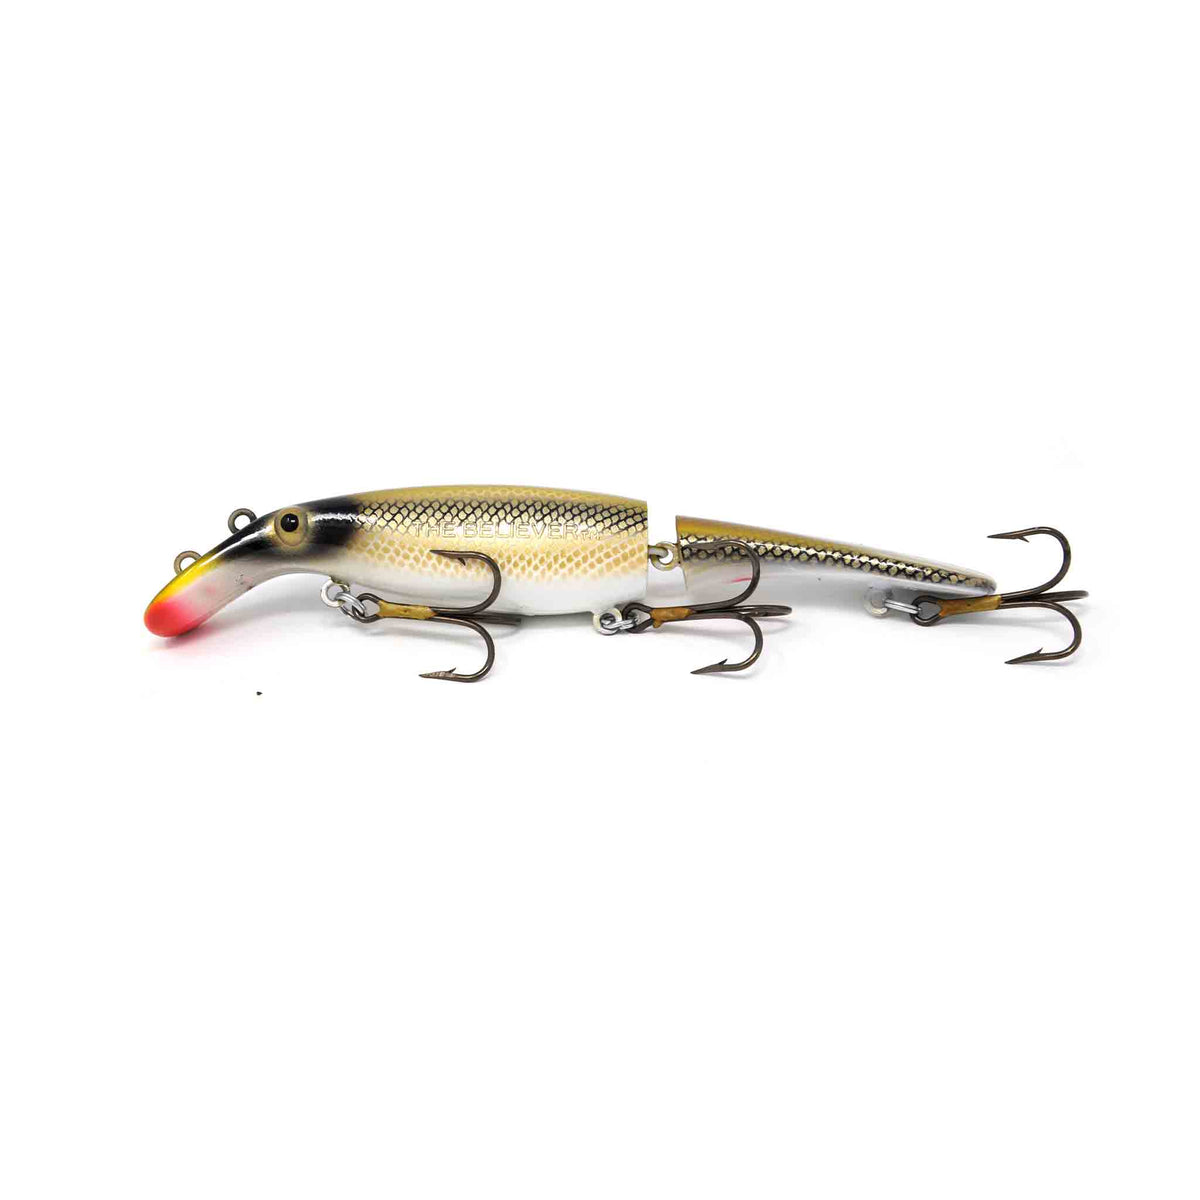 View of Crankbaits Drifter Tackle Believer Jointed 8" Crankbait Sucker available at EZOKO Pike and Musky Shop